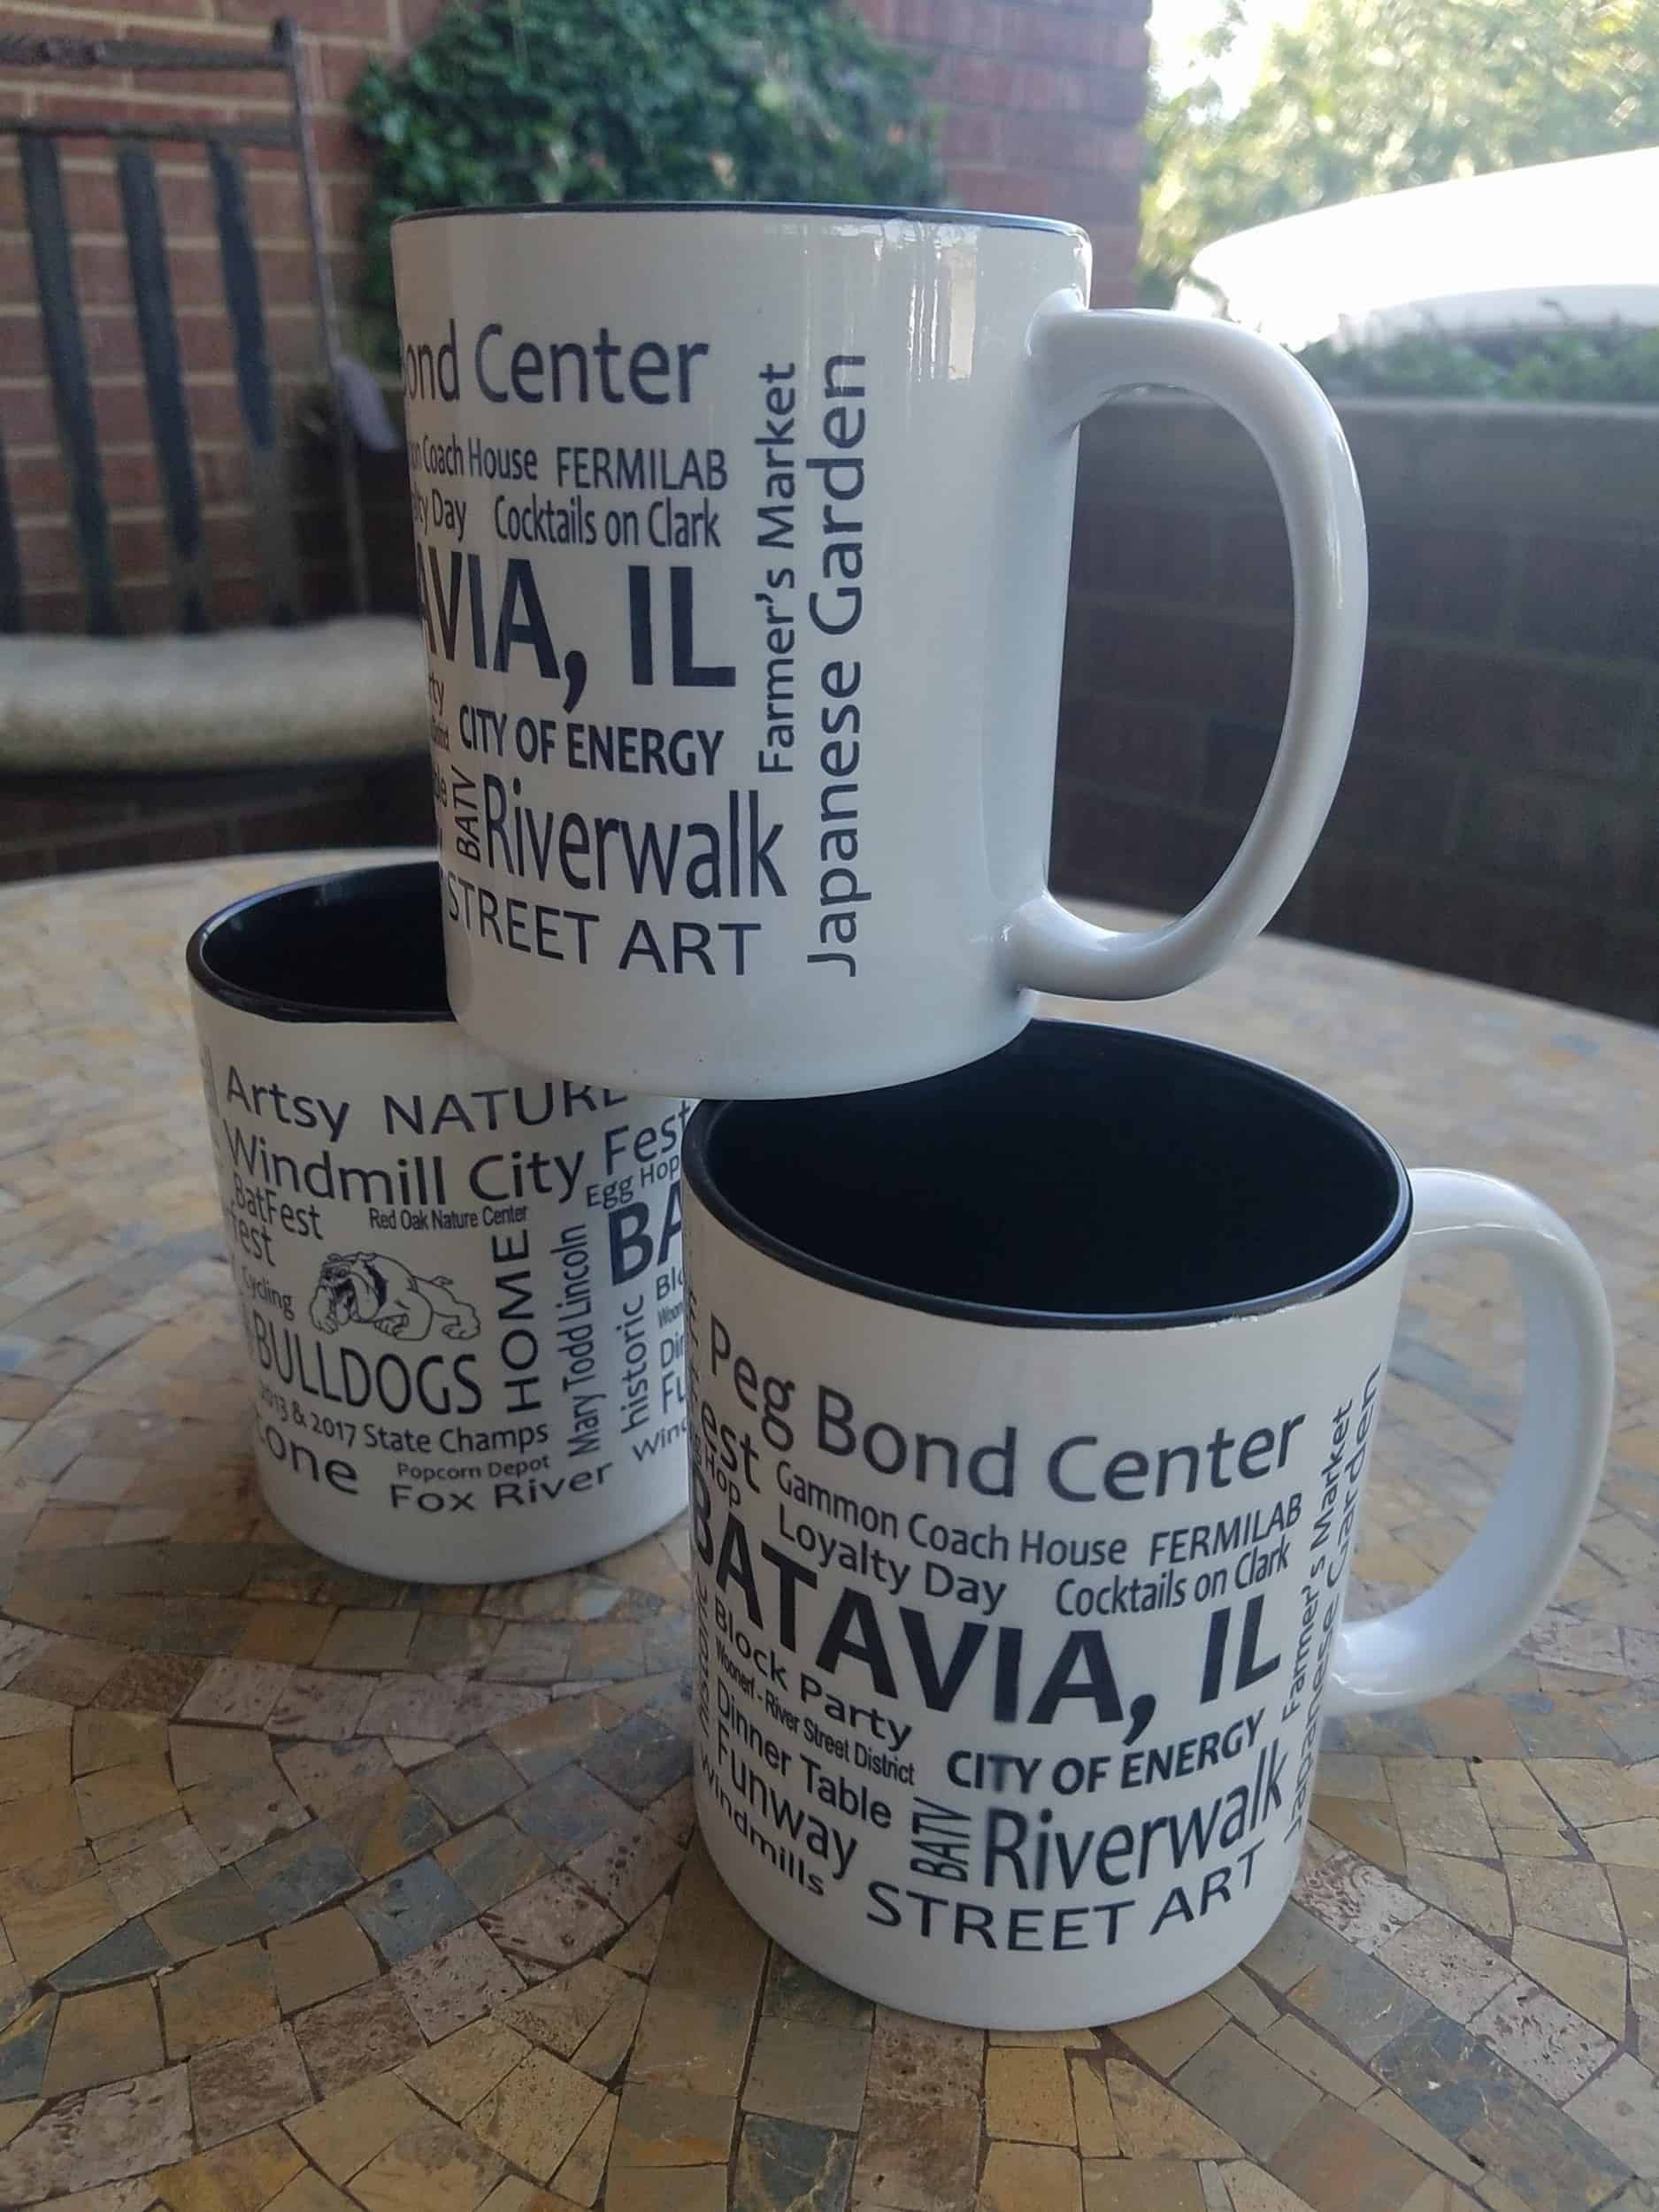 This Batavia Coffee Mug is made with love by Studio Patty D! Shop more unique gift ideas today with Spots Initiatives, the best way to support creators.